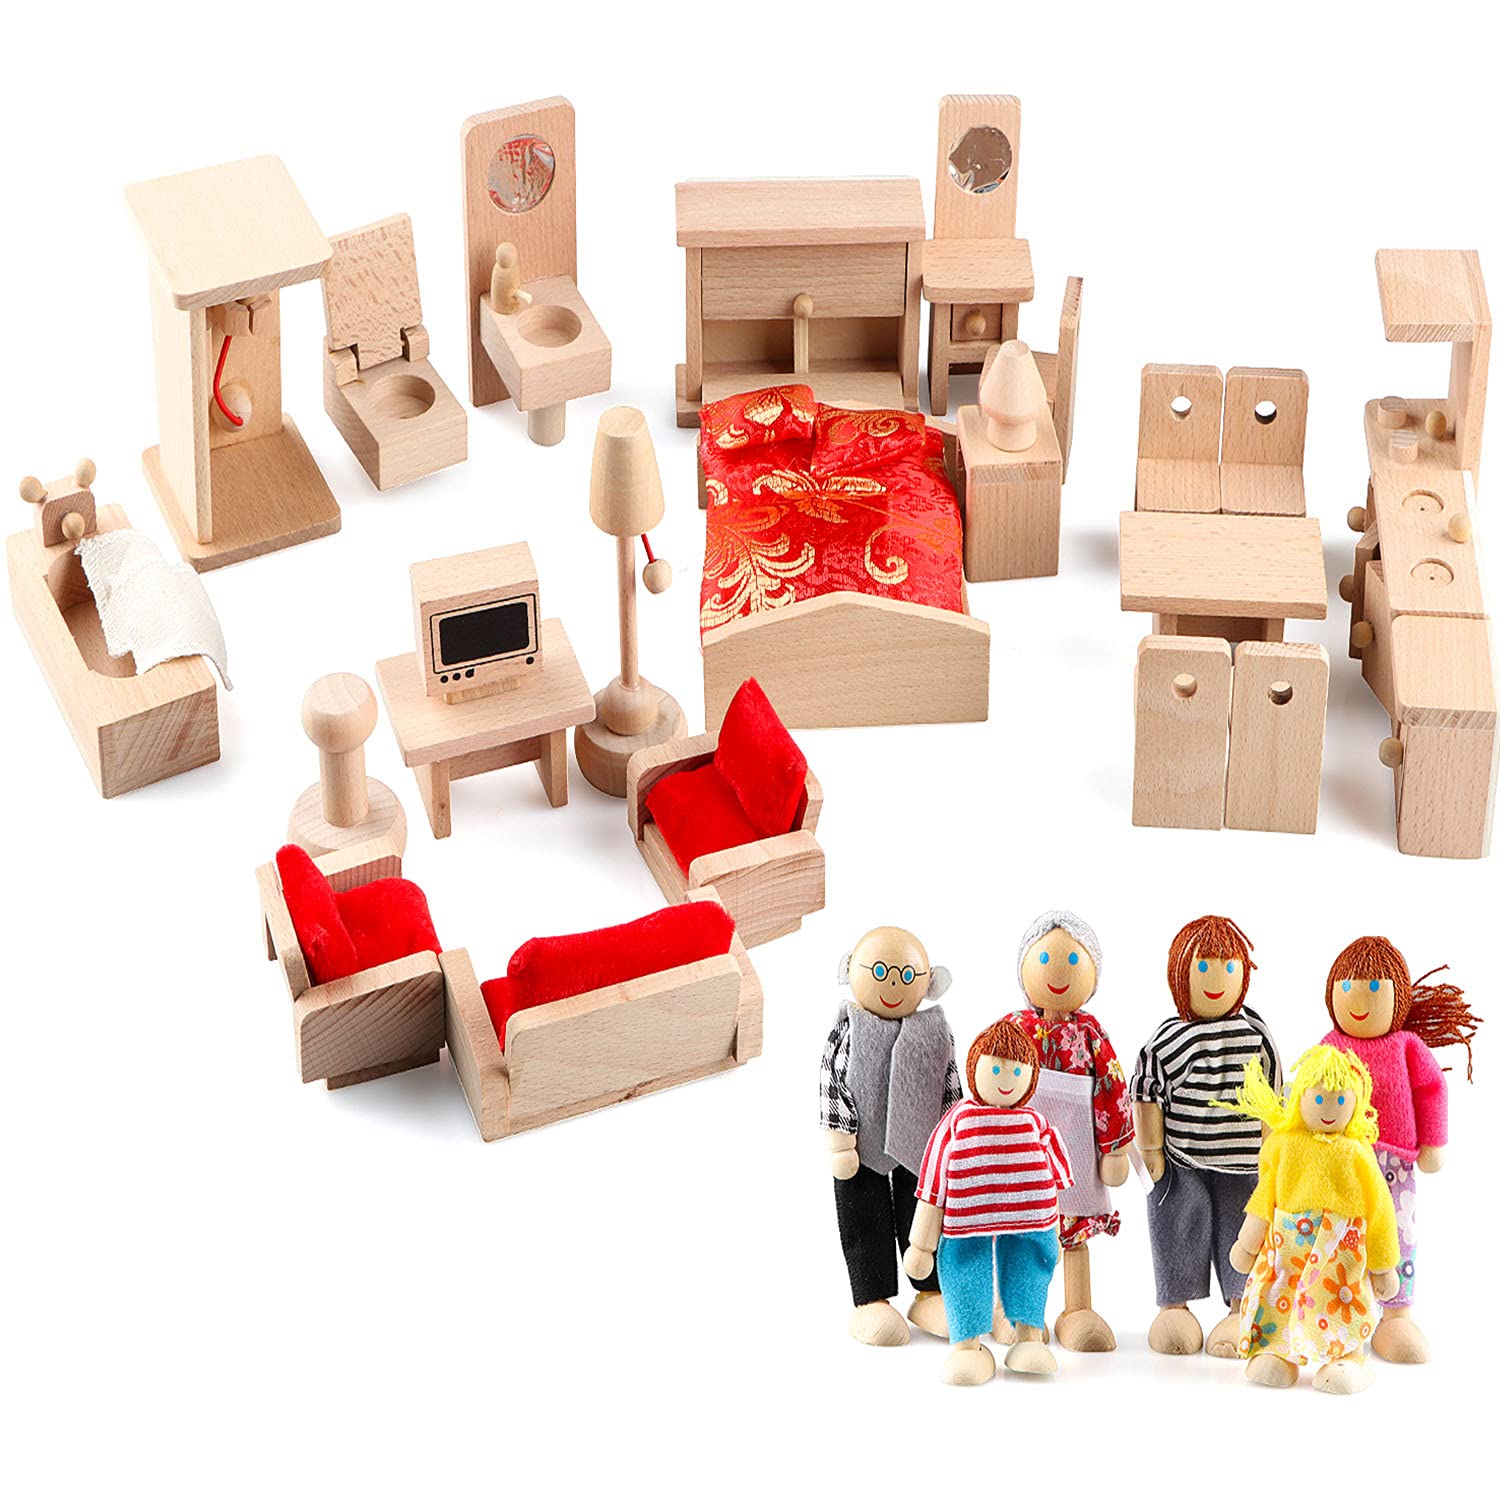 5 Set Dollhouse Furniture Accessories Wooden Bathroom/Living Room/Dining Room/Bedroom/Kitchen House 6 Family Doll Decoration Pretend Play Kids Girls Toys 40 Pcs